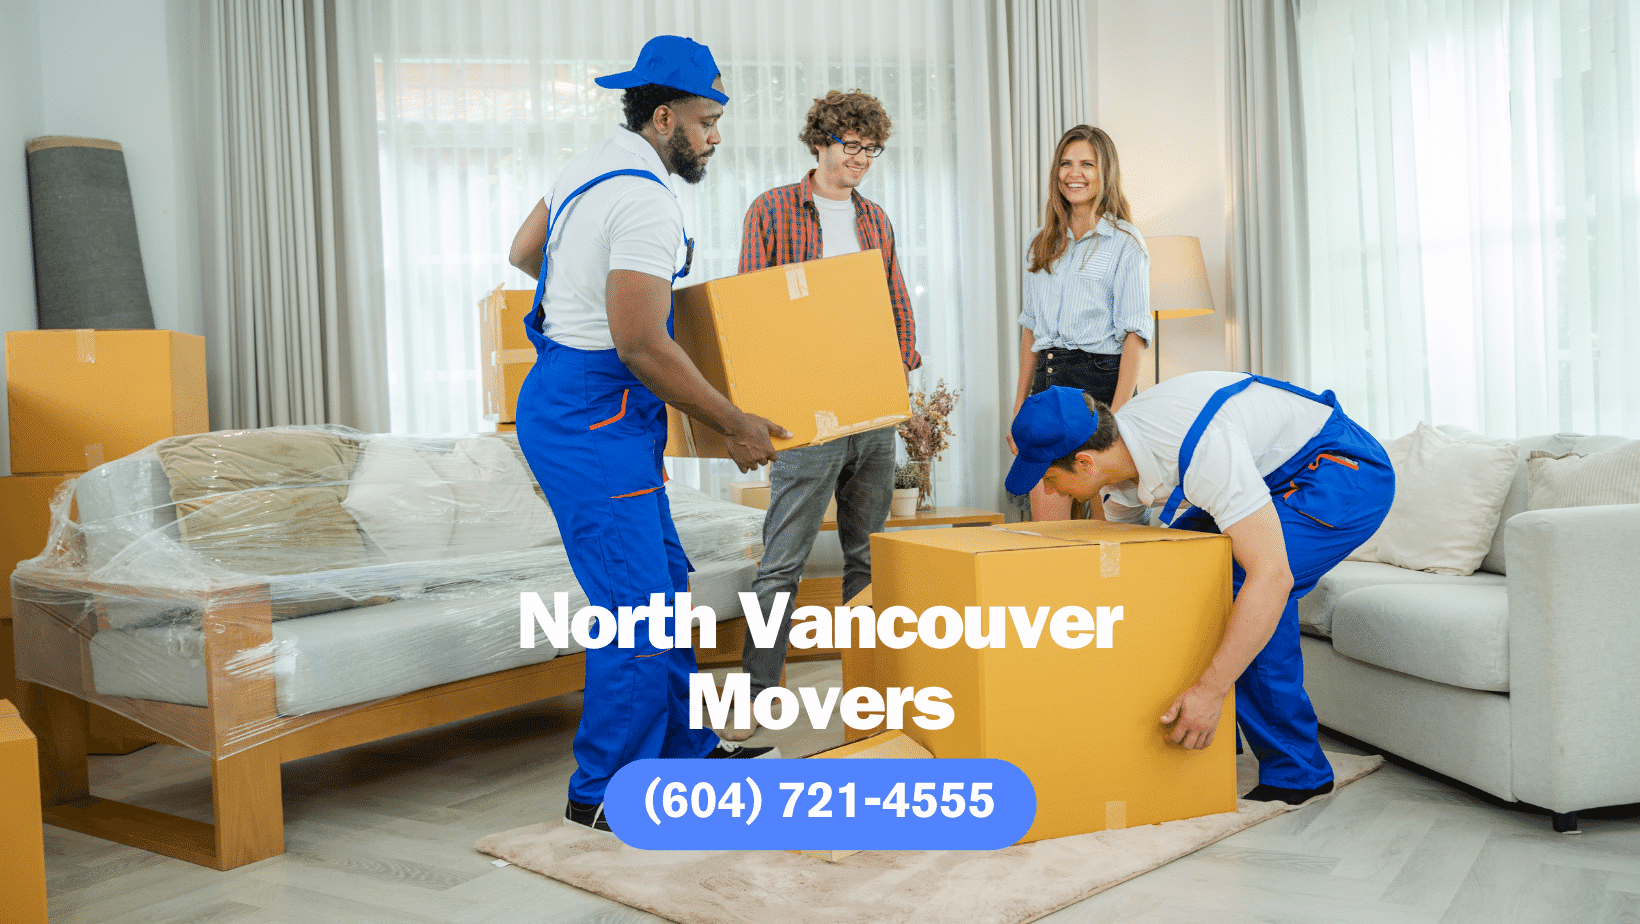 1PRO Movers at work in North Vancouver, BC